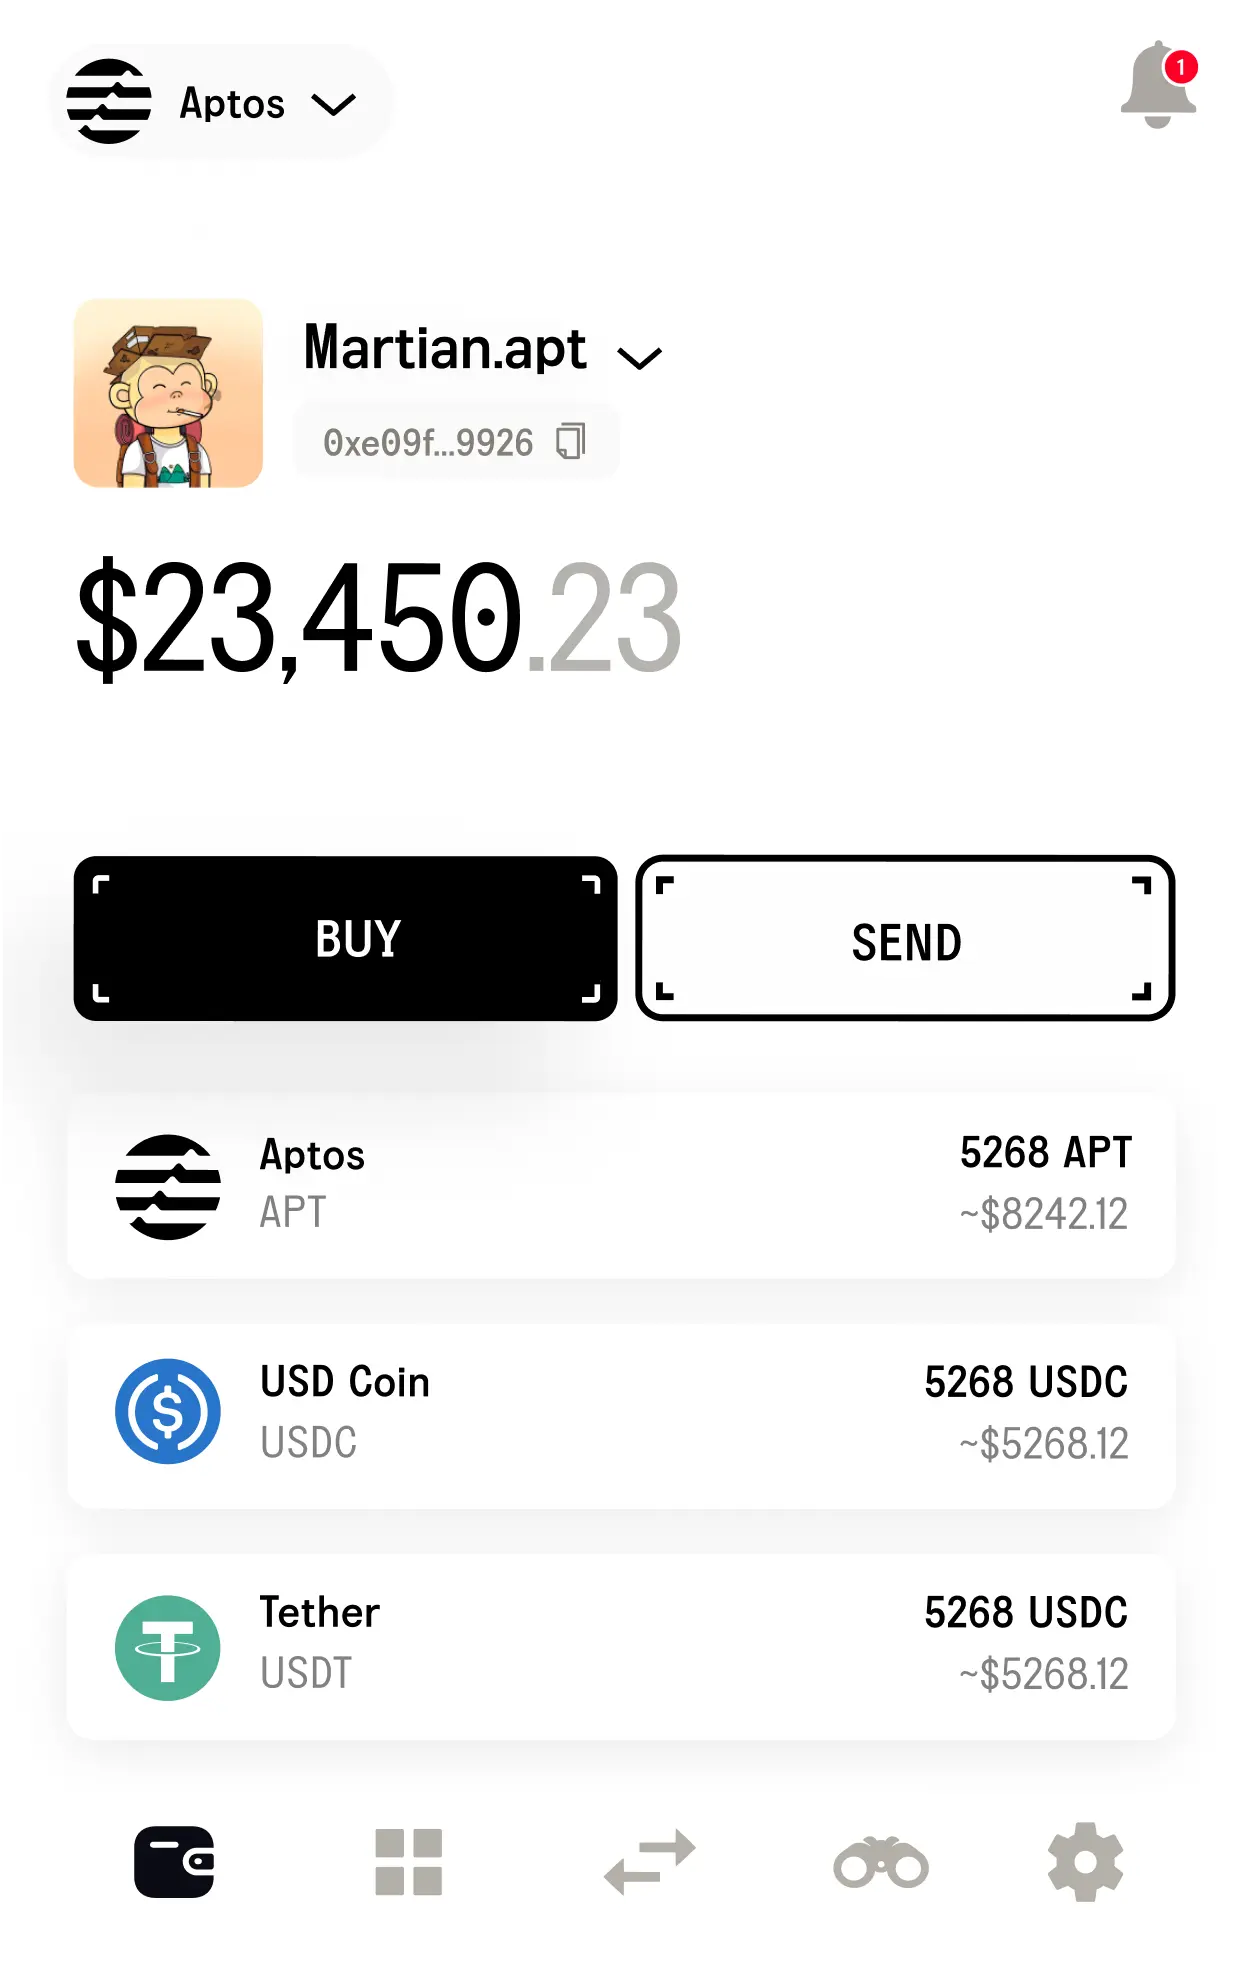 Self-Custodial wallet for Aptos and Sui